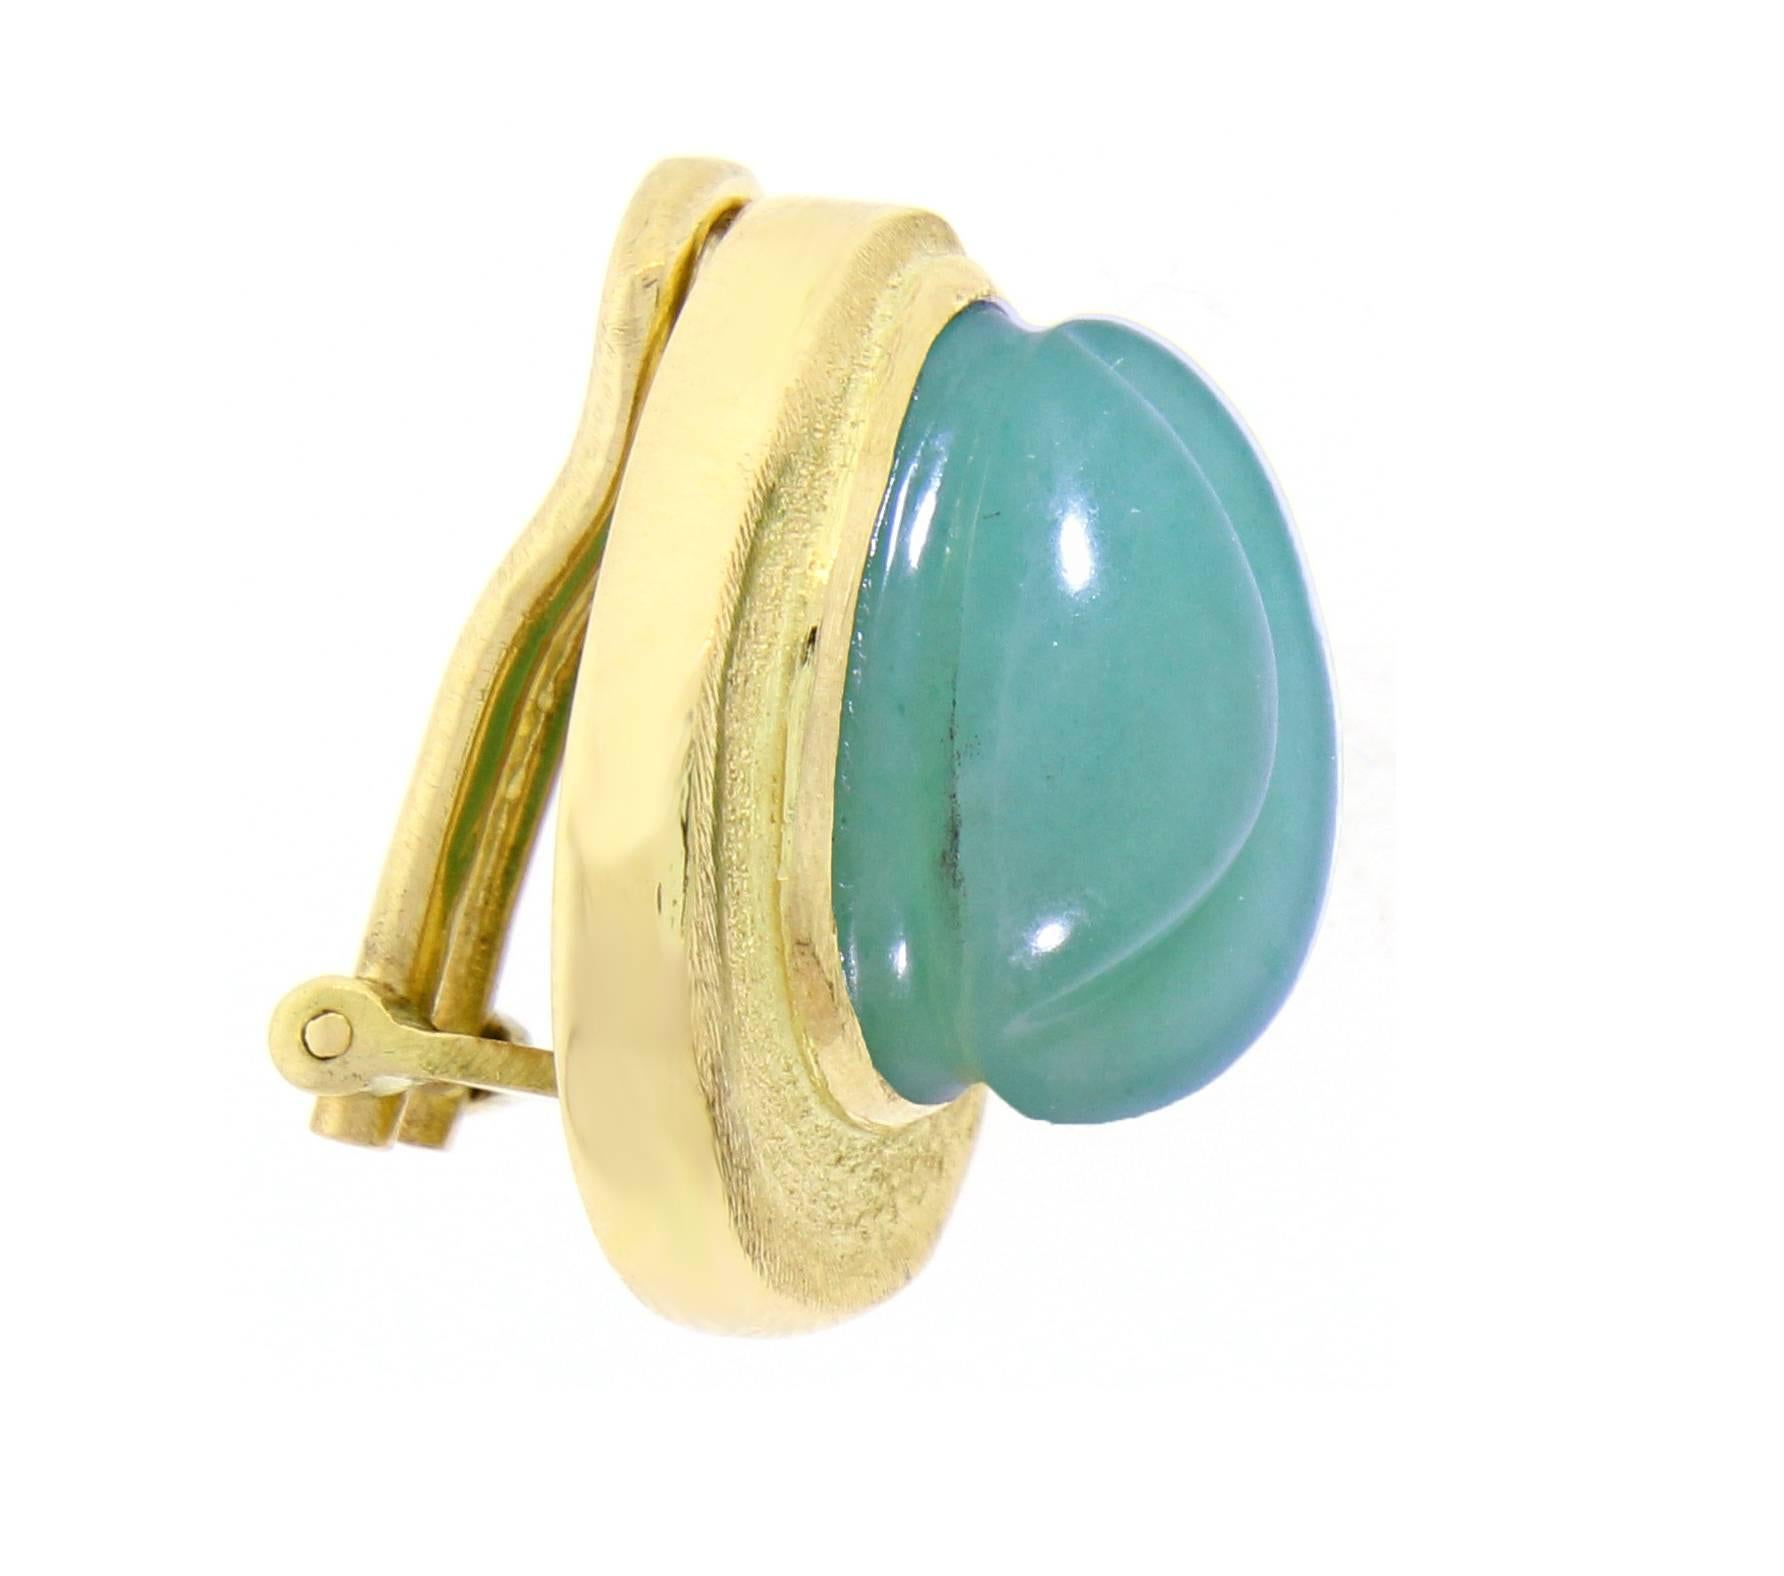 Brushed 18 karat yellow gold earrings by Burle Marx  featuring  intricately carved chrysoprase in the “forma livre” (free form) style. Roberto and Haroldo Burle Marx were particularly known for their use of large gemstones, often fashioned by